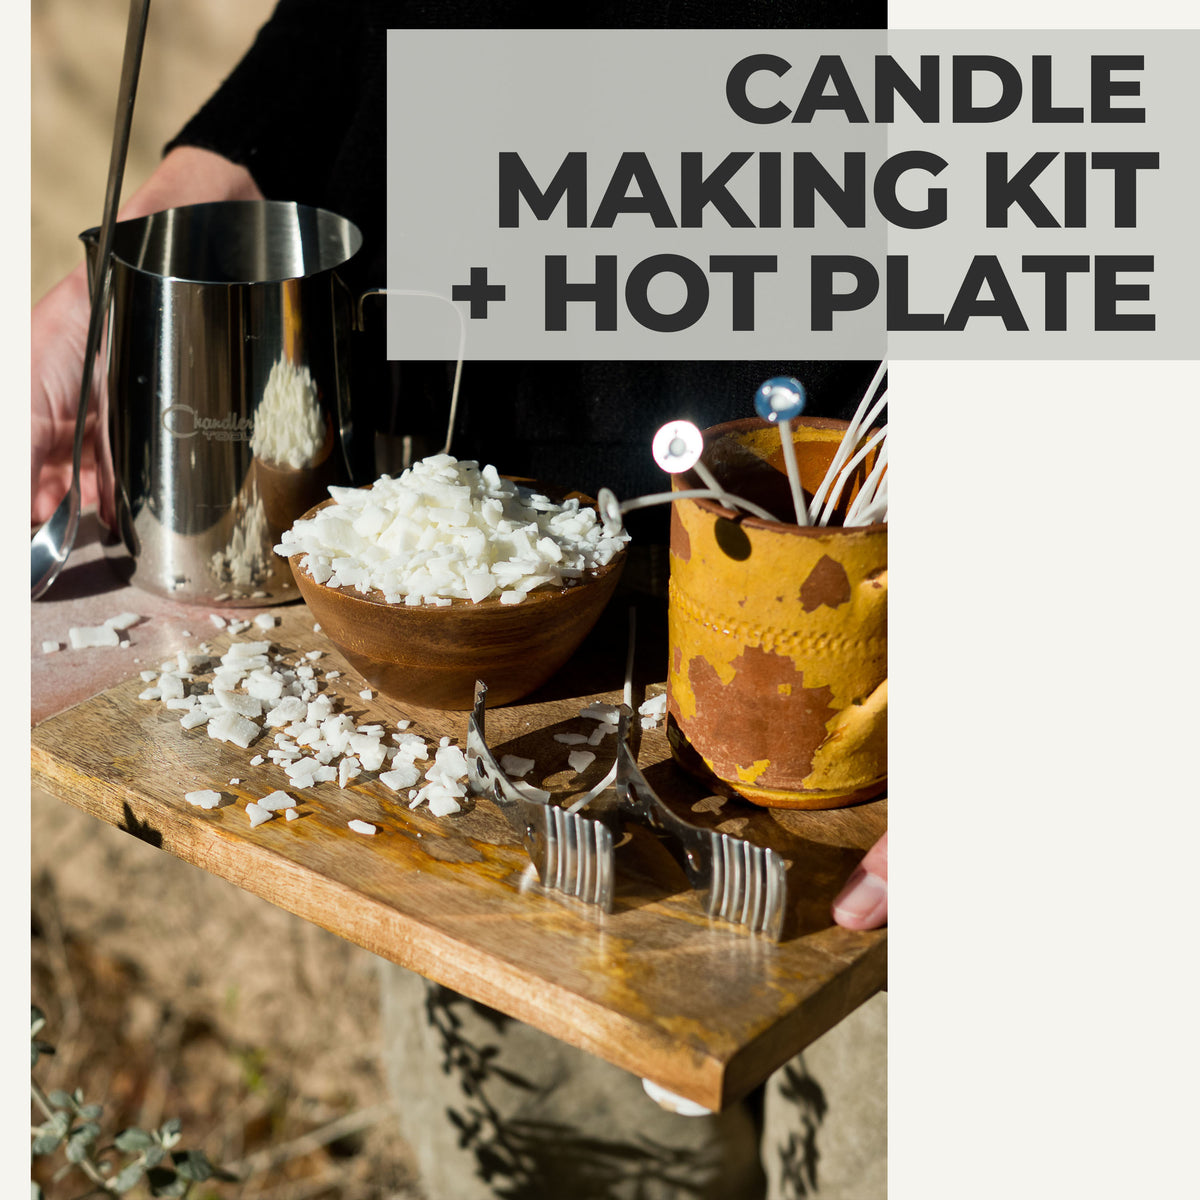 Candle Making Kit With Hot Plate,candle Making Kit For Beginners